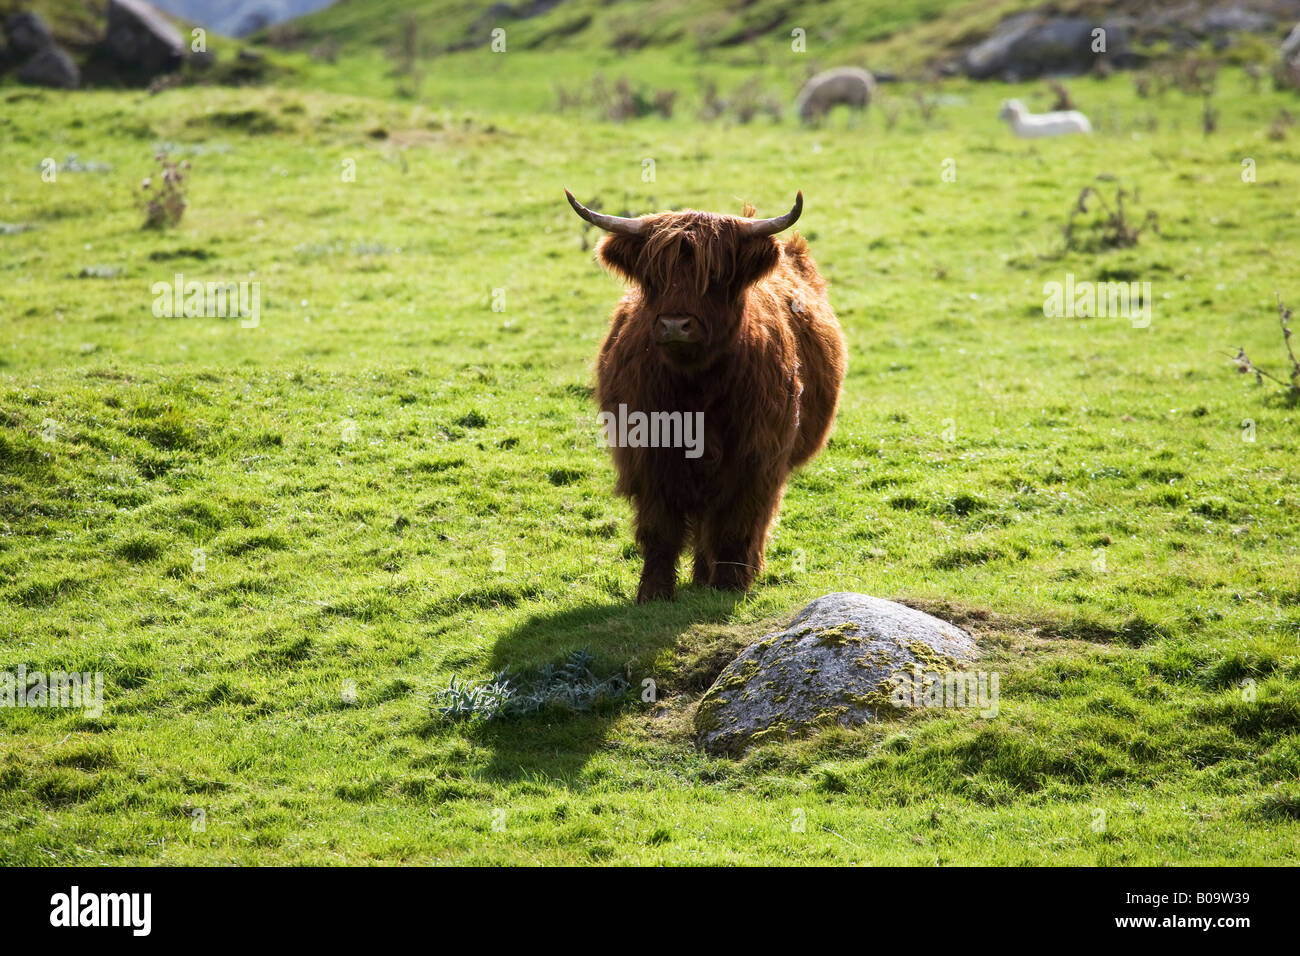 A Highland Cow standing in a green field, Dumfries & Galloway, Scotland, UK Stock Photo